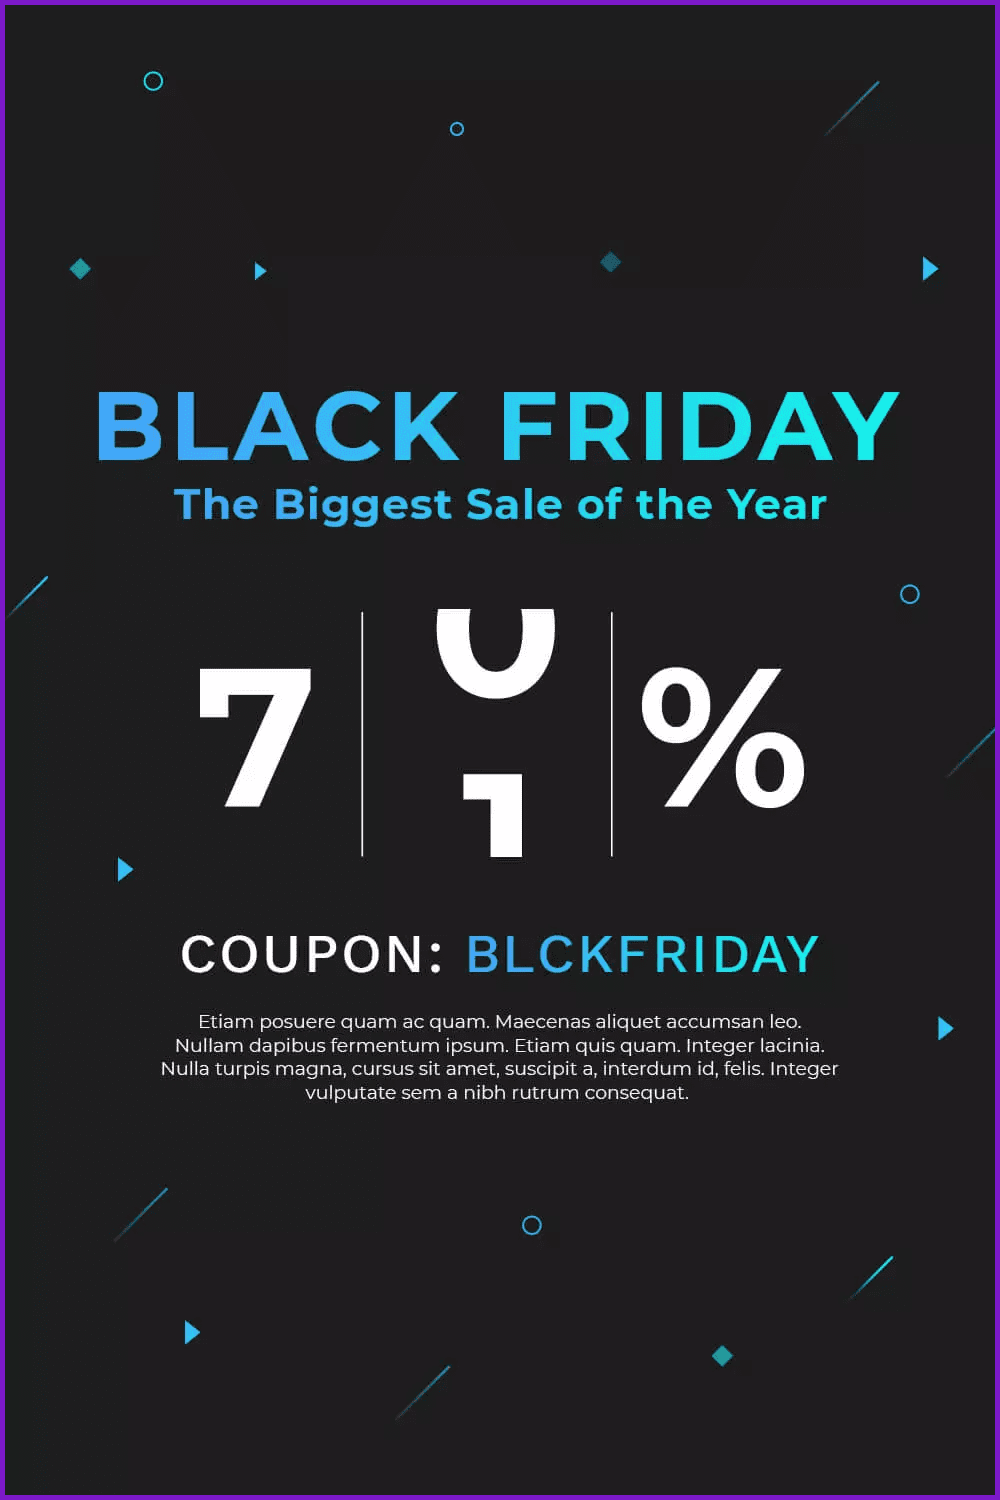 Poster with text and black friday friday with black background.